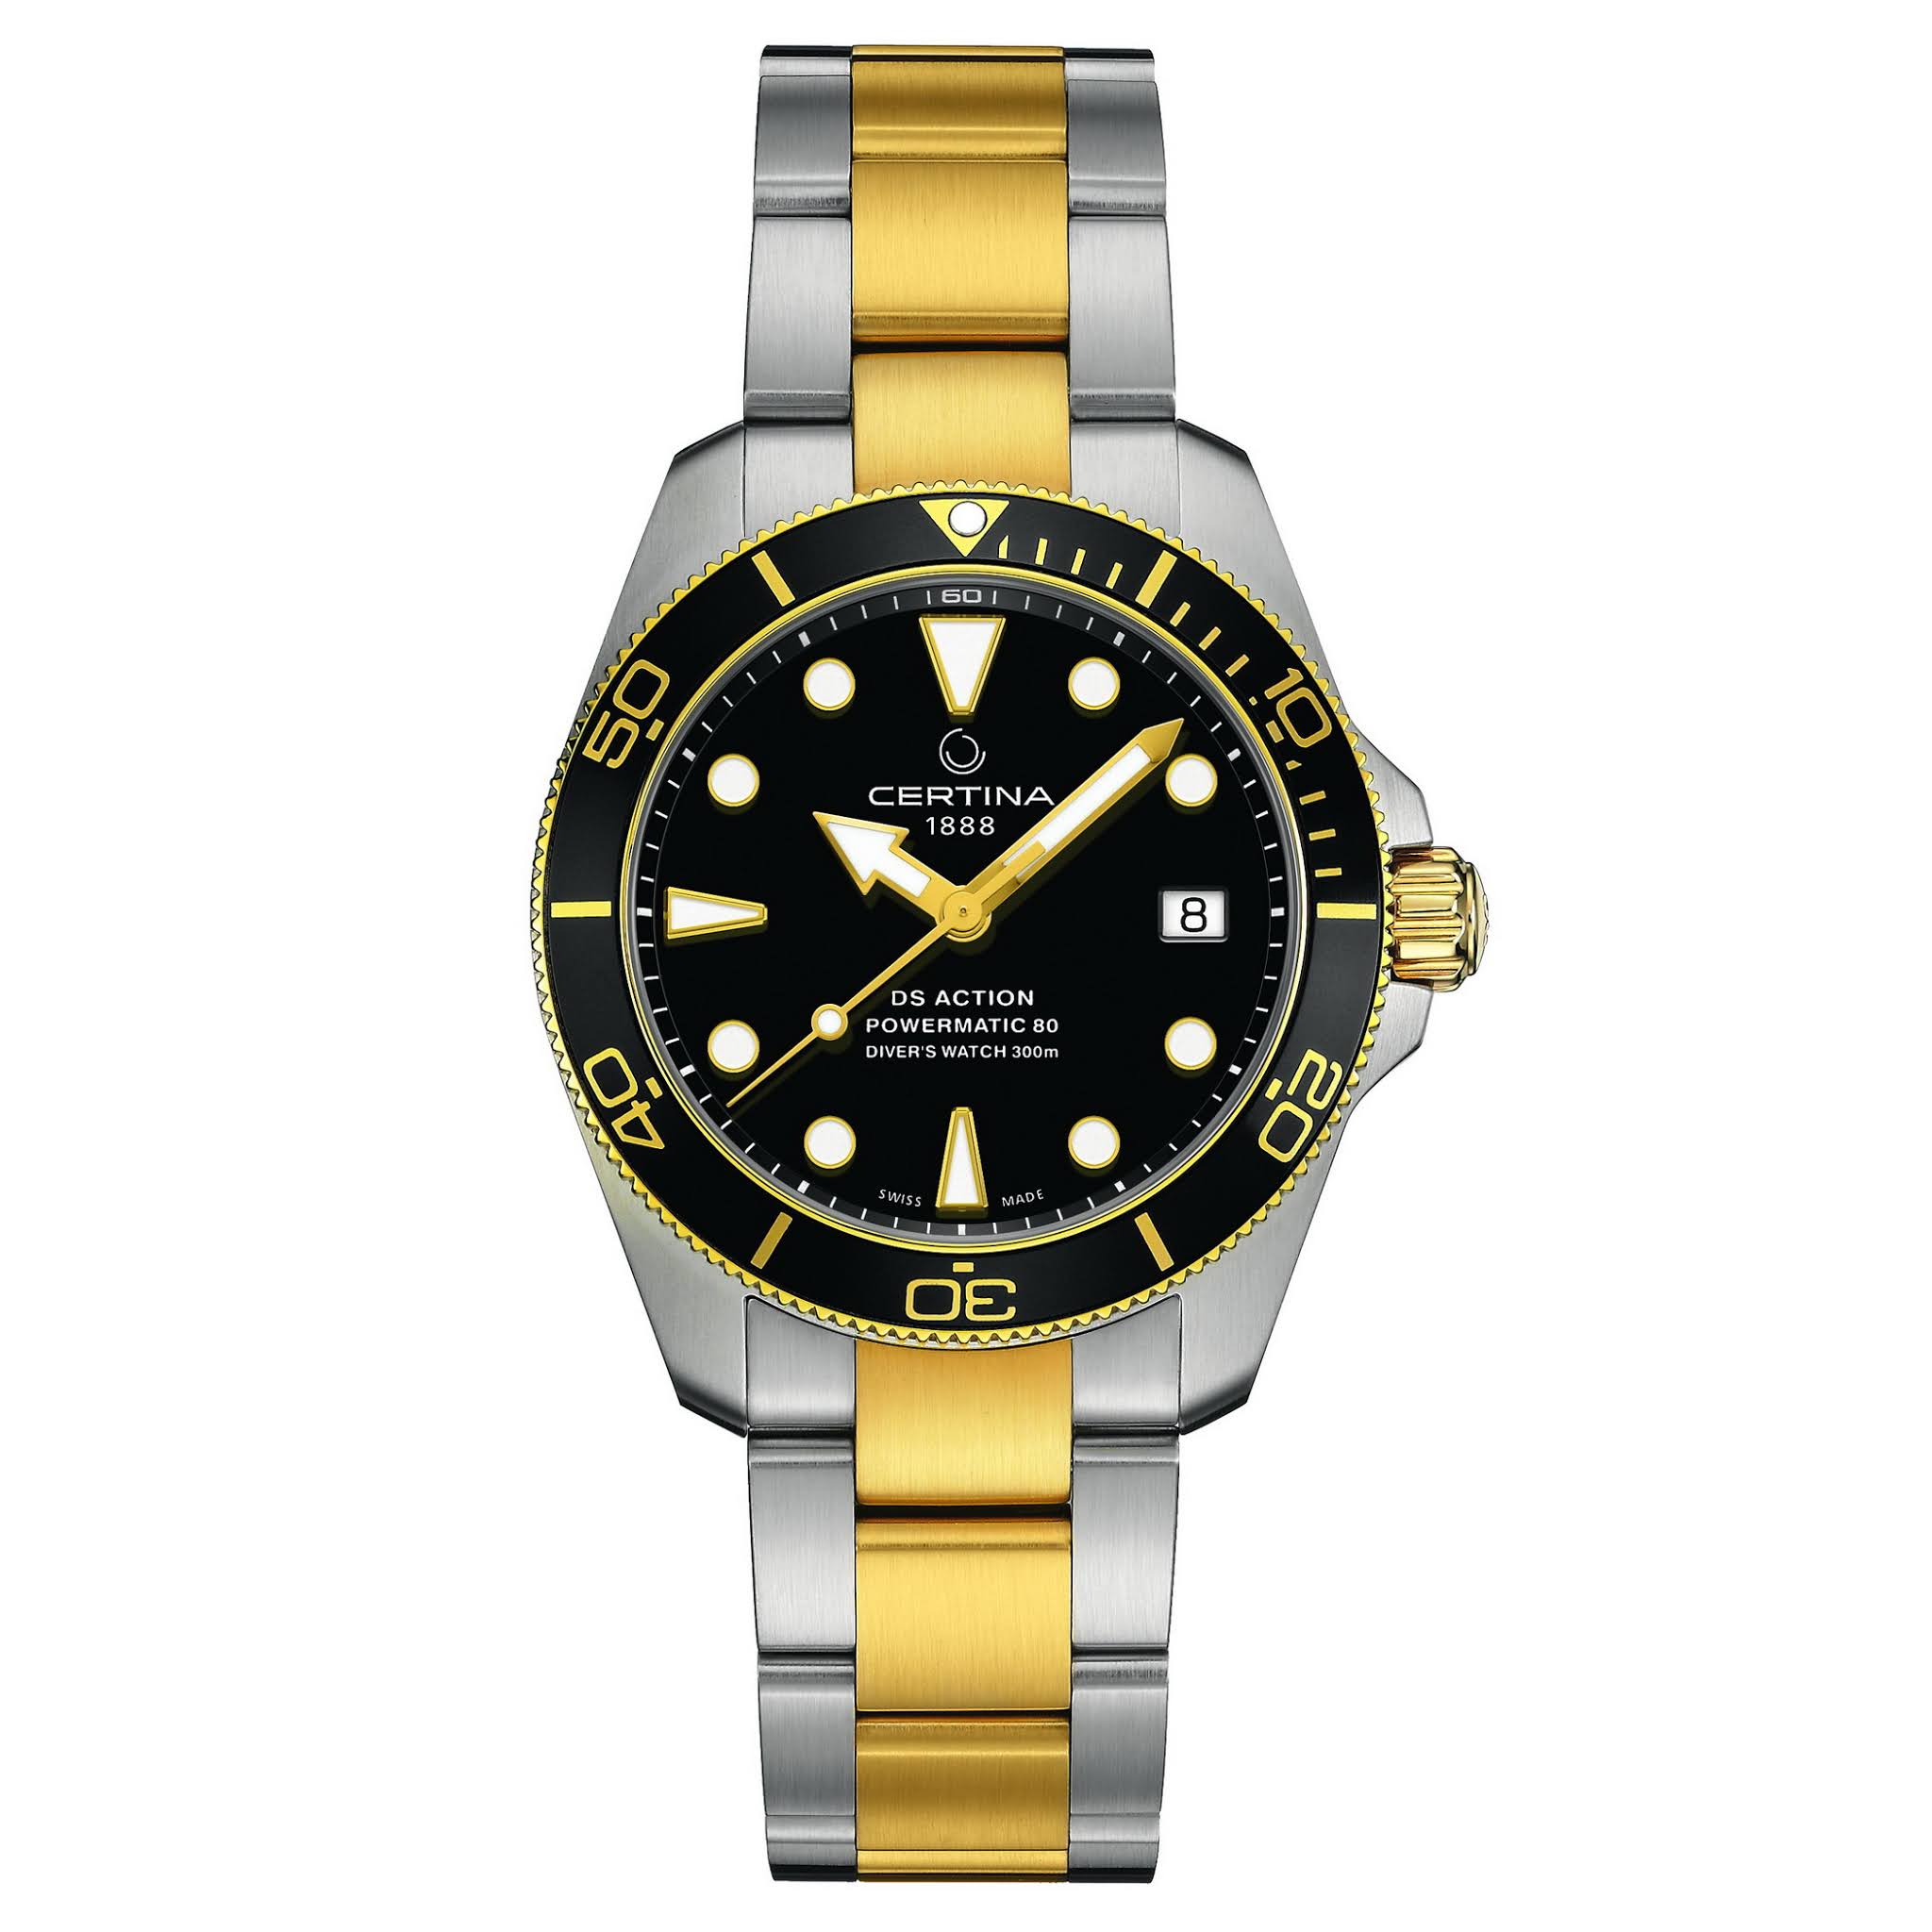 Certina's new DS Action Diver 38mm CERTINA%2BDS%2BAction%2BDiver%2B38mm%2B04